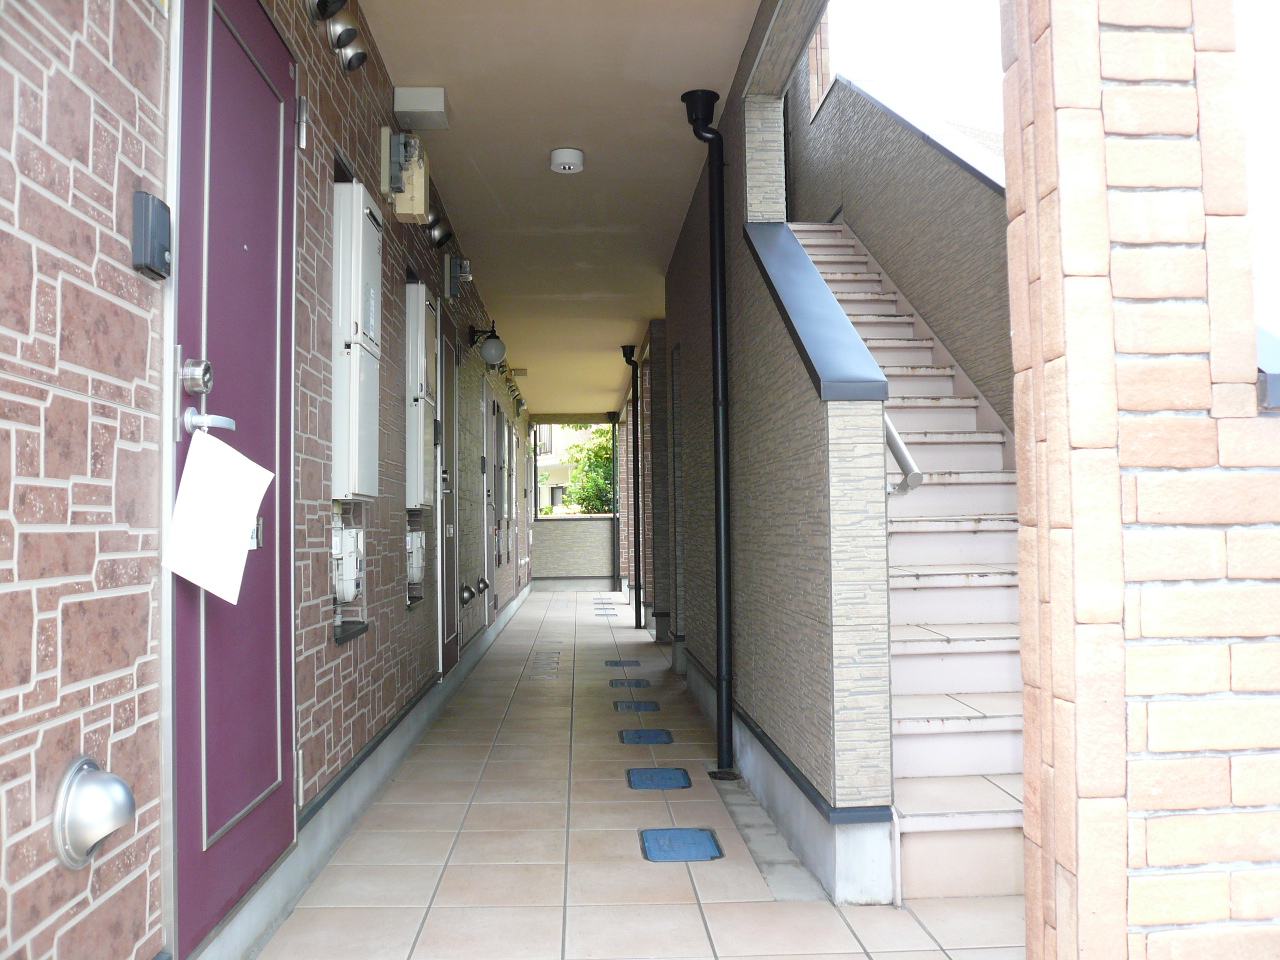 Other common areas. Wide corridor